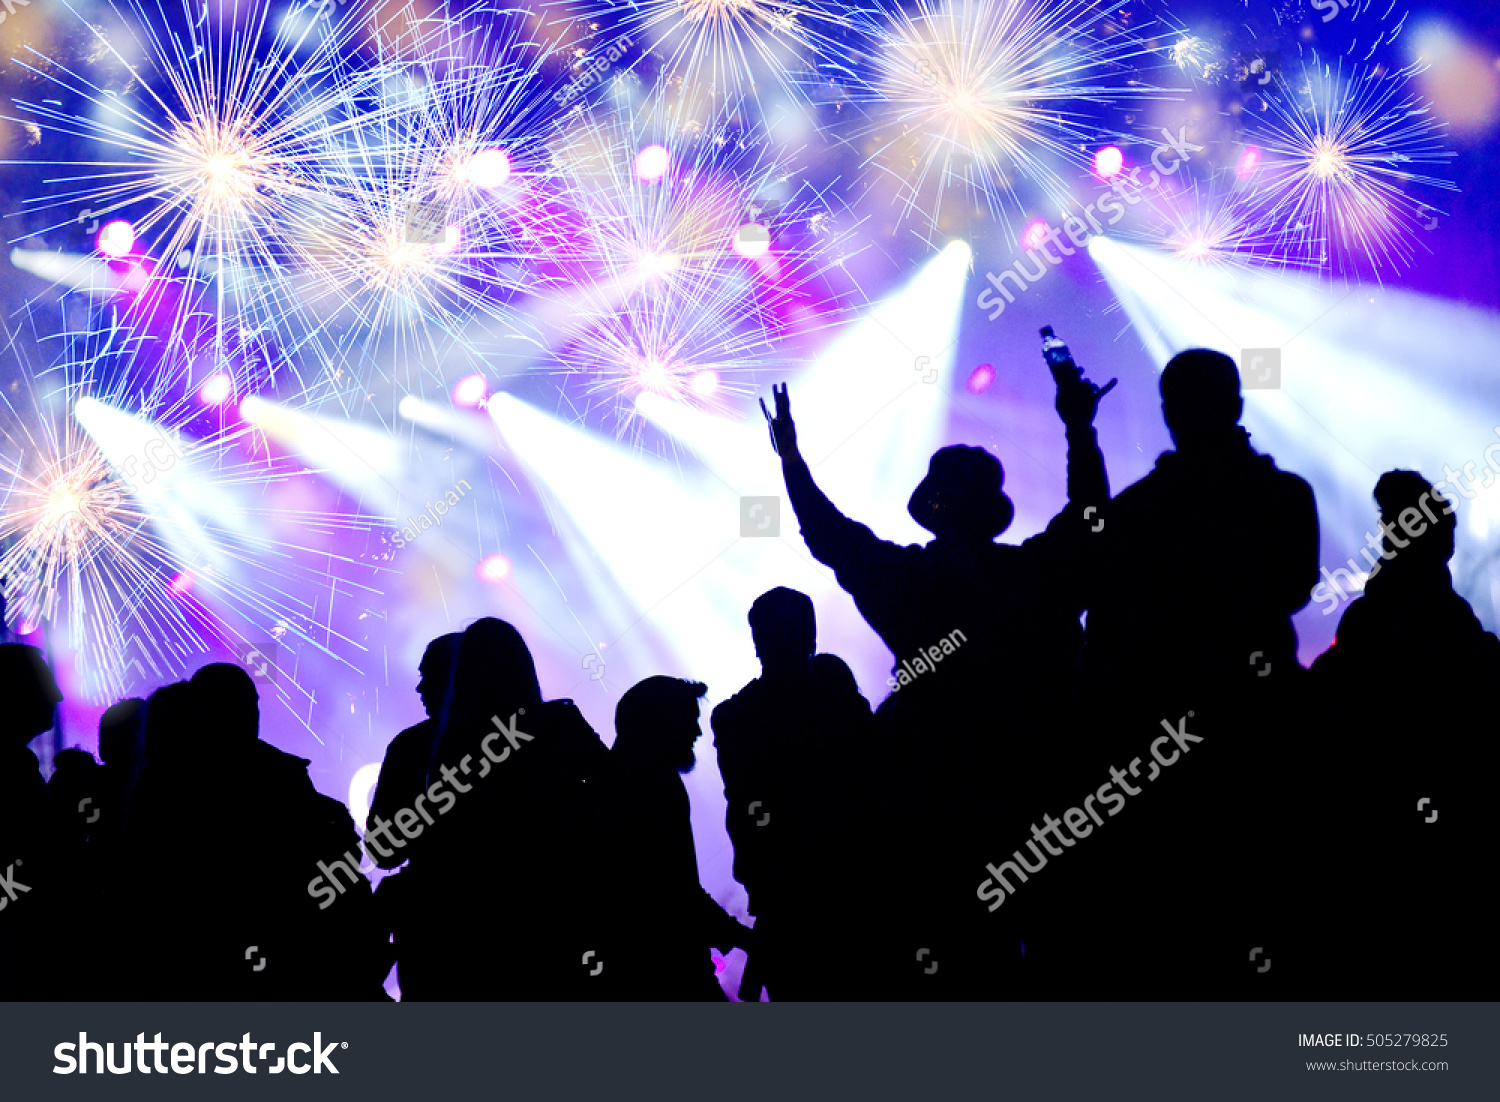 New Year concept with celebrating crowd and fireworks #505279825